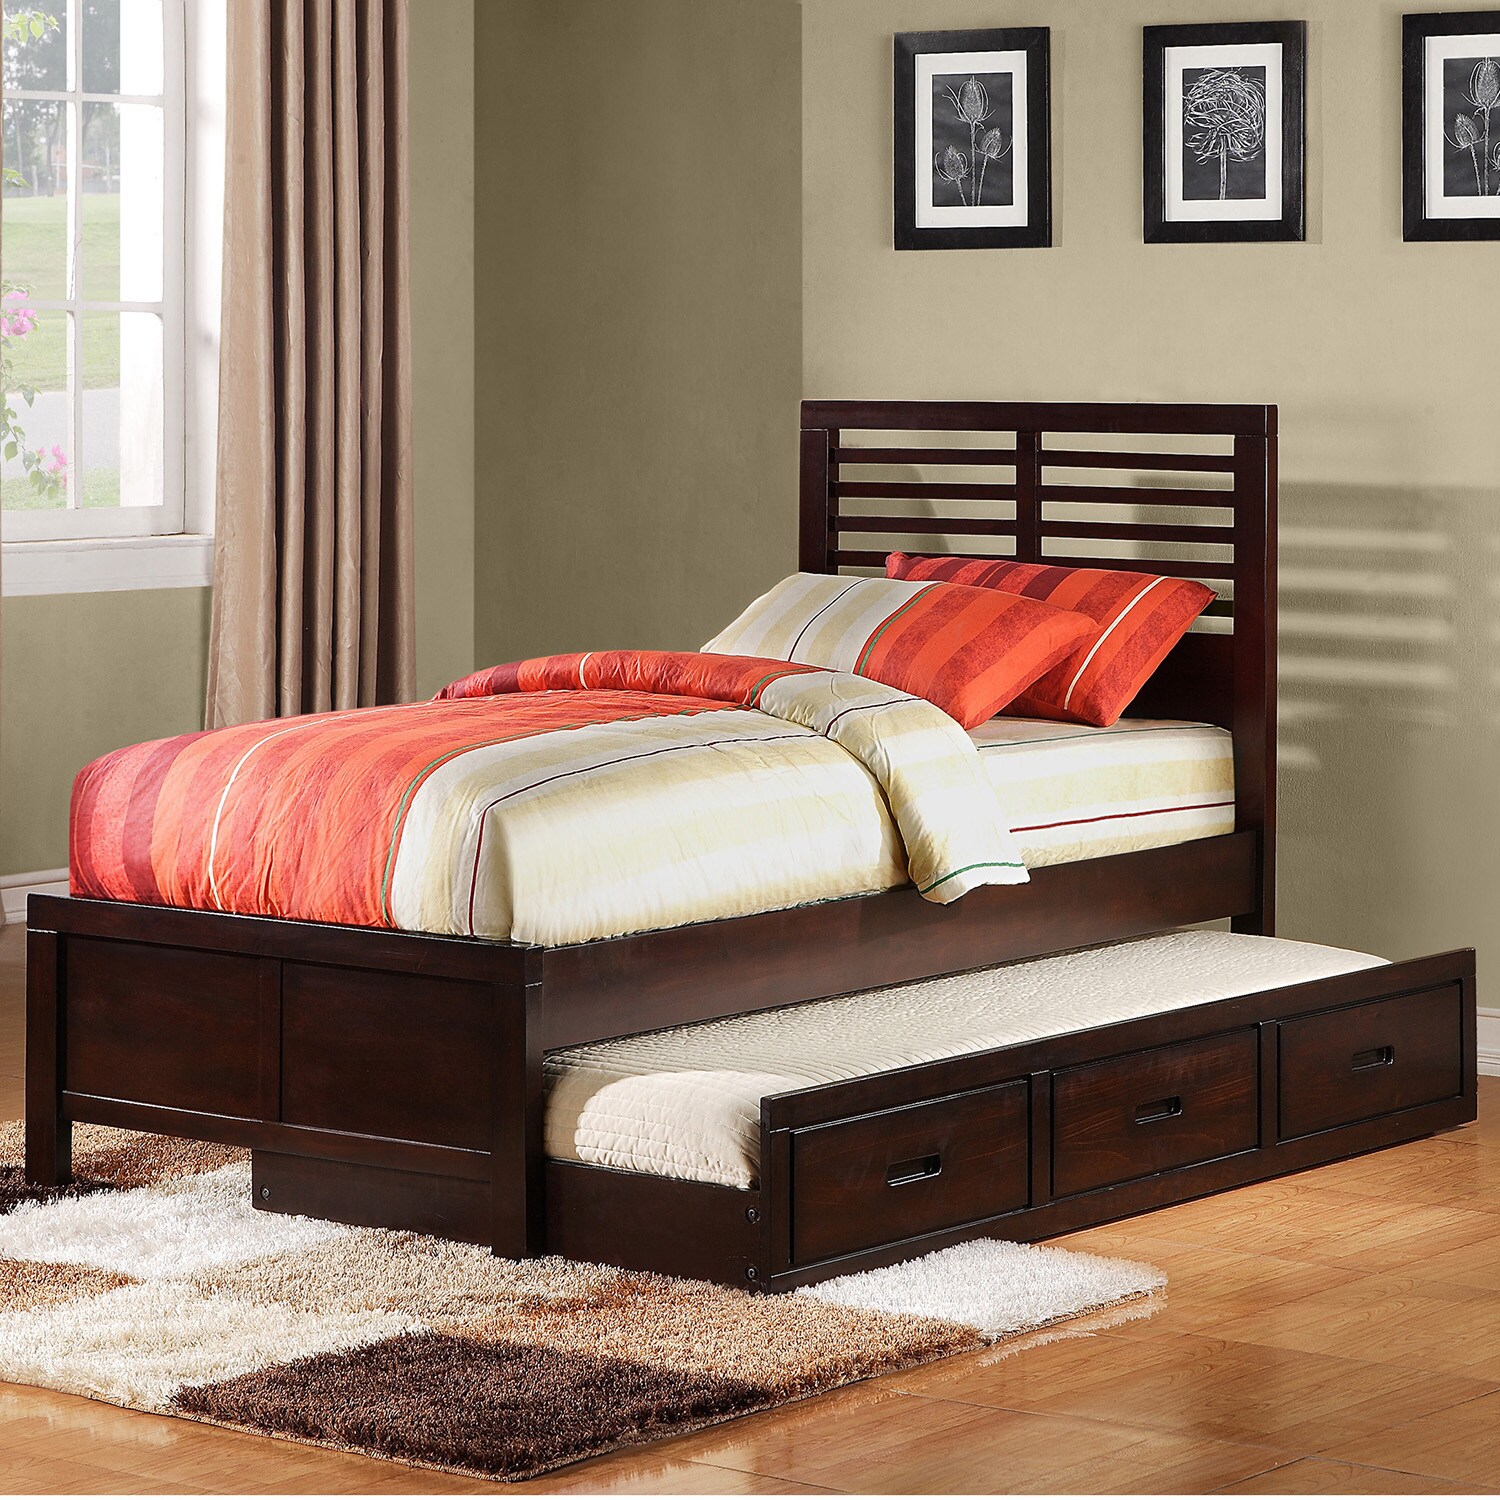 Tribecca Home Tribecca Home Ferris Cherry Full size Platform Bed With Trundle Unit Cherry Size Full